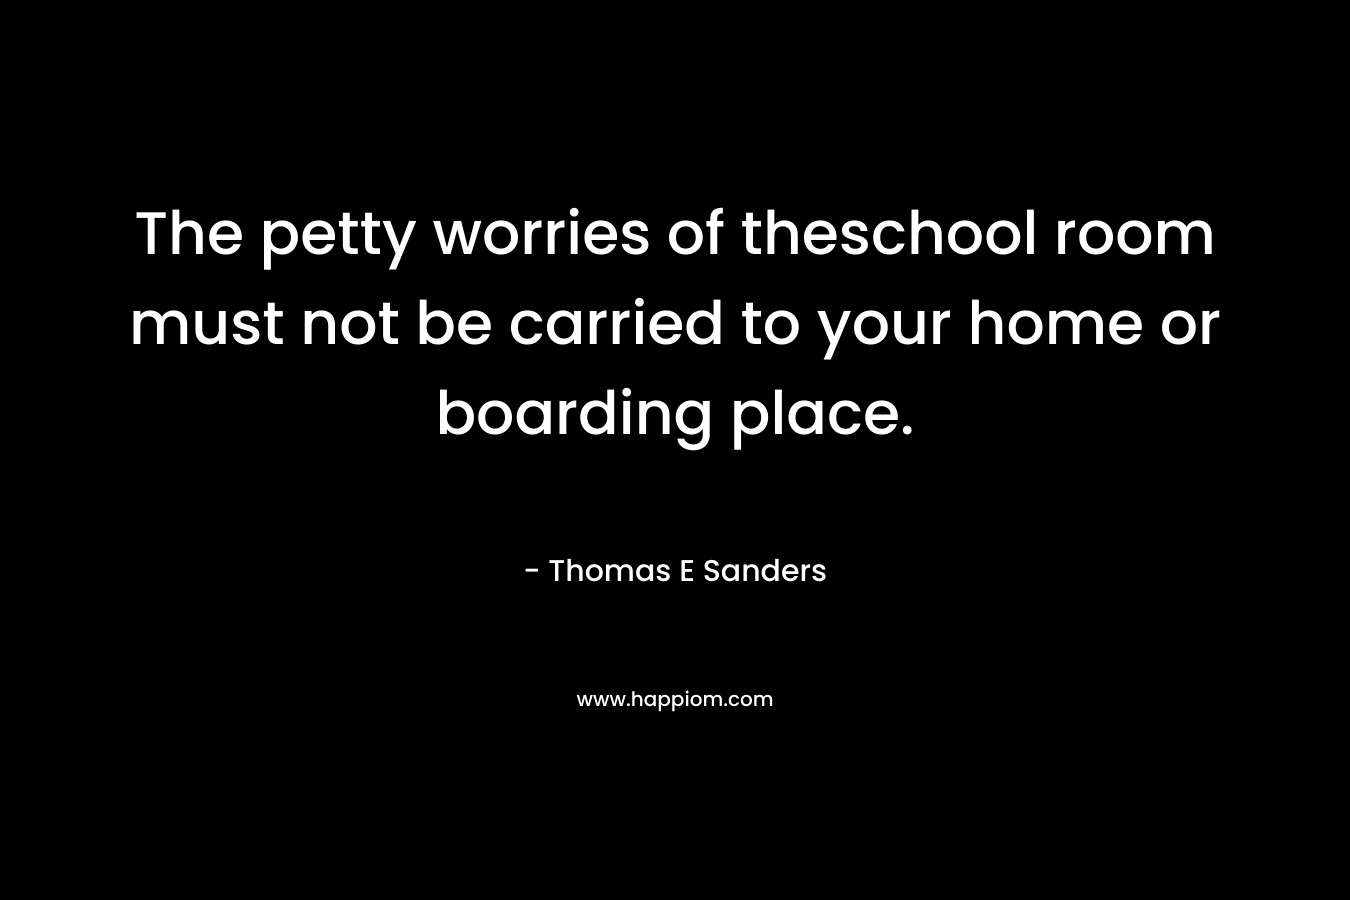 The petty worries of theschool room must not be carried to your home or boarding place.